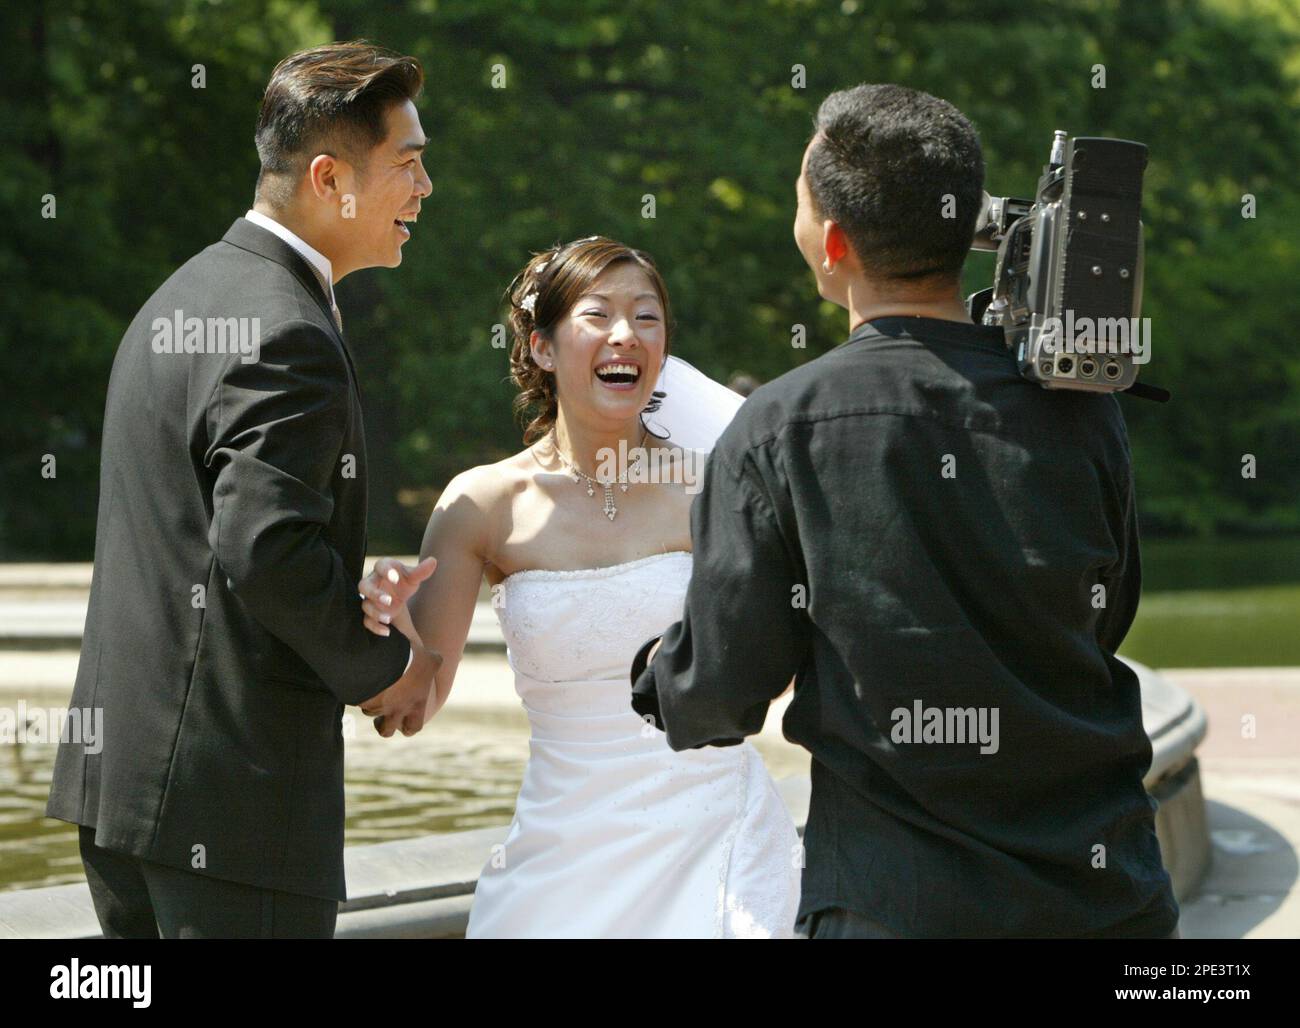 Video production company owner Kim Wang, right, who photographs and videotapes weddings, shares a laugh with Hong Kong-born Donna Lau, center, and her fiance Eric Luk, left, Thursday, June 9, 2005, at pic